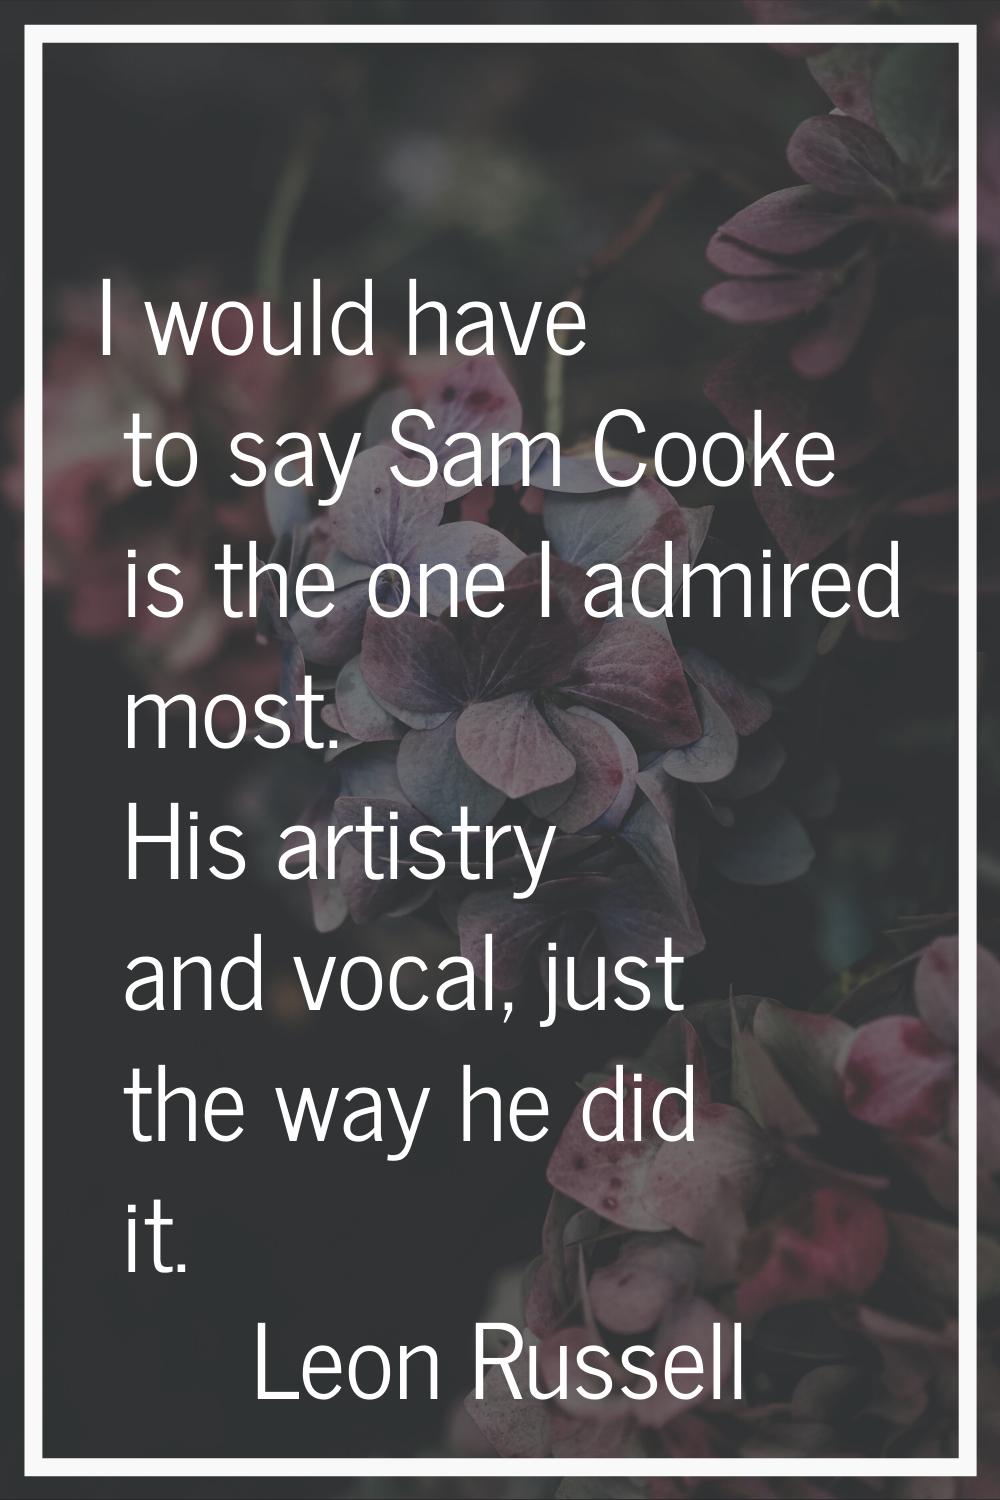 I would have to say Sam Cooke is the one I admired most. His artistry and vocal, just the way he di